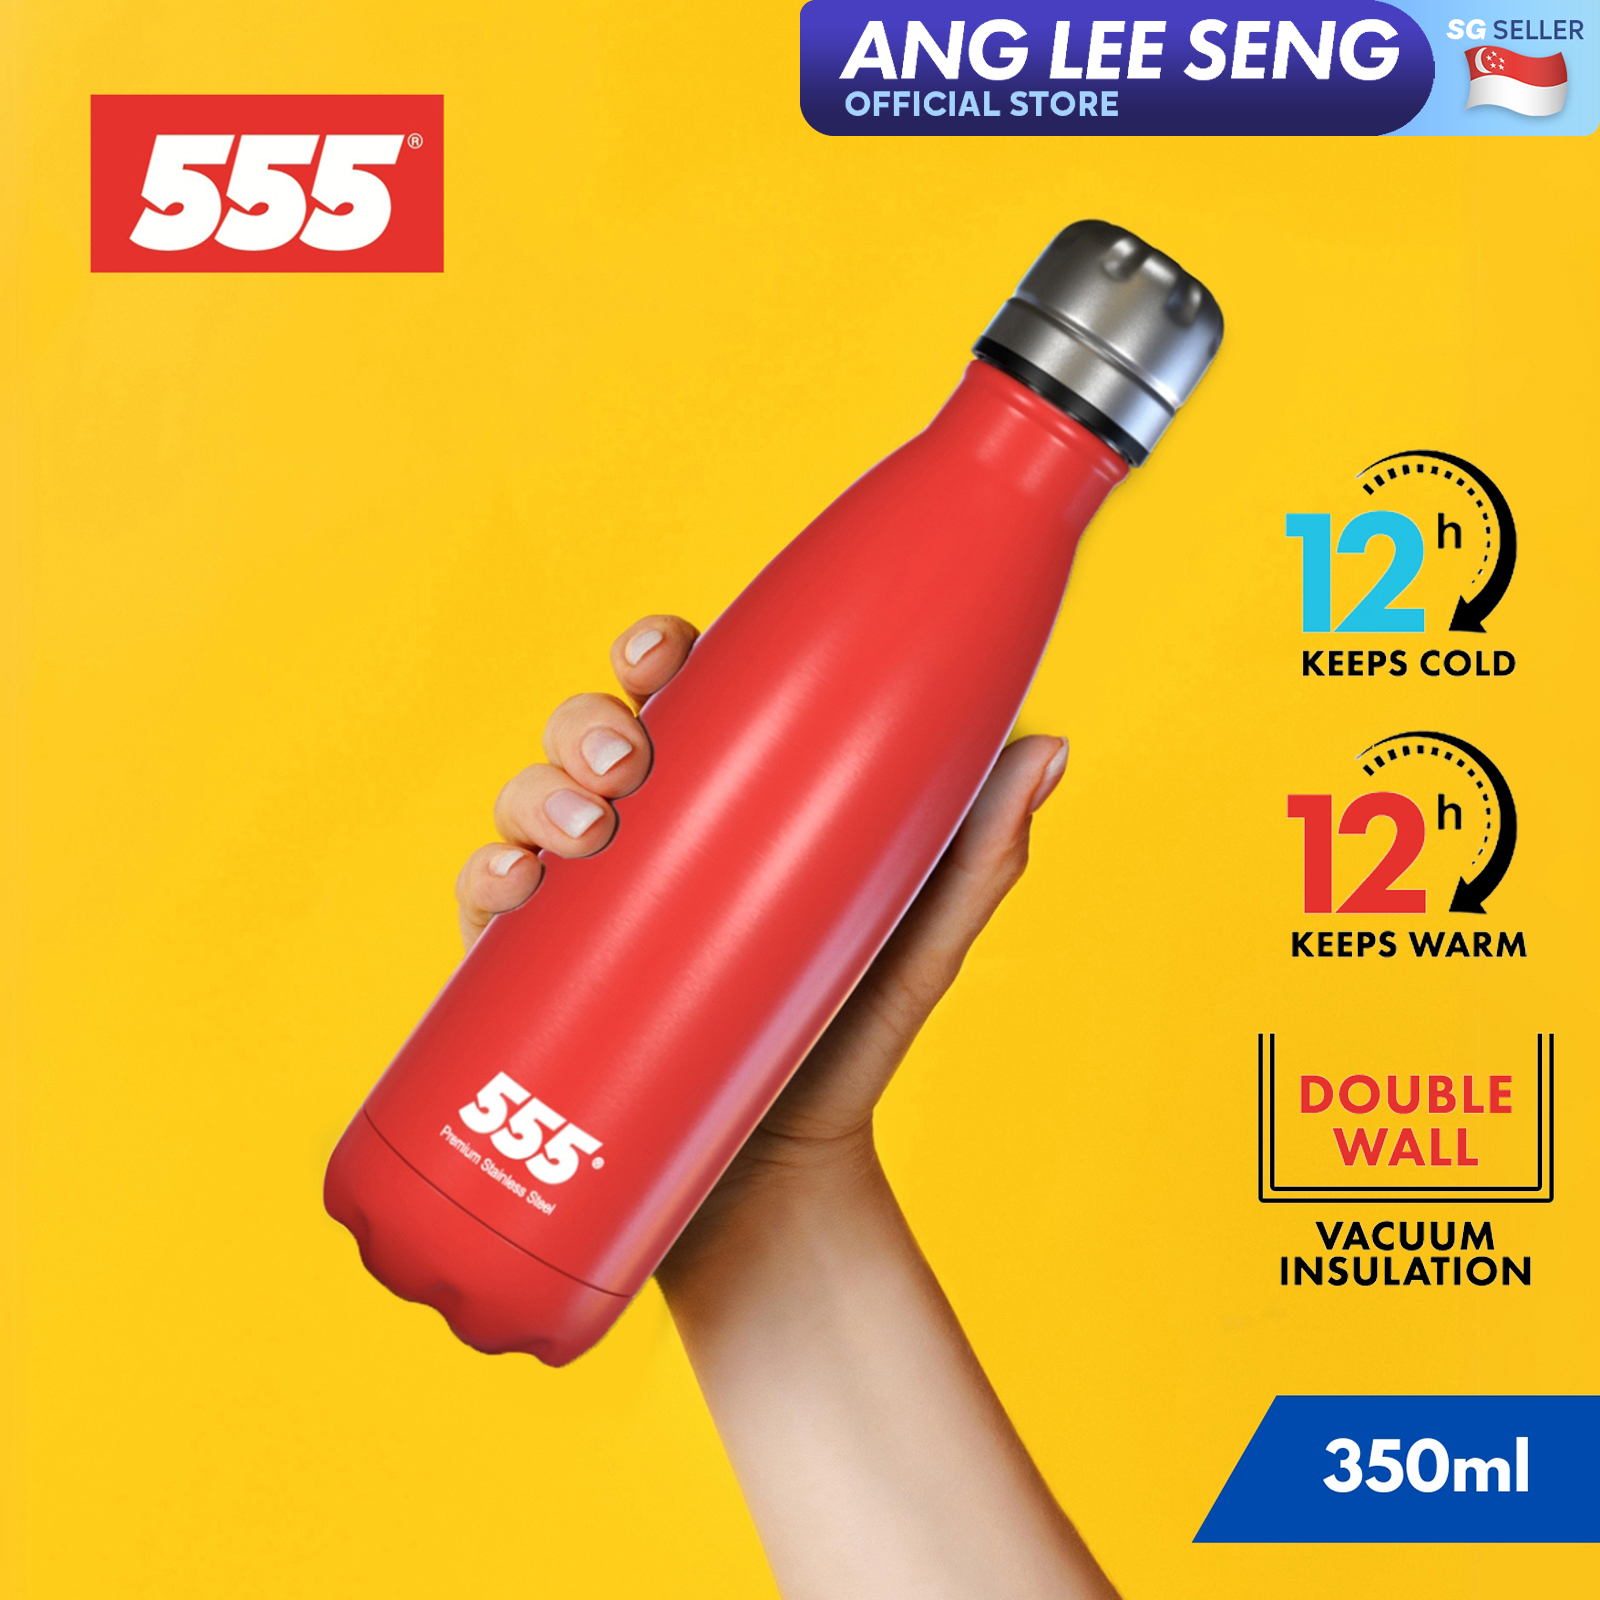 555 Stainless Steel Cola Bottle Style Vacuum Thermal Flask 350ml - Keep Hot Warm/Cold Cool - For Coffee, Tea, Beverage, Water